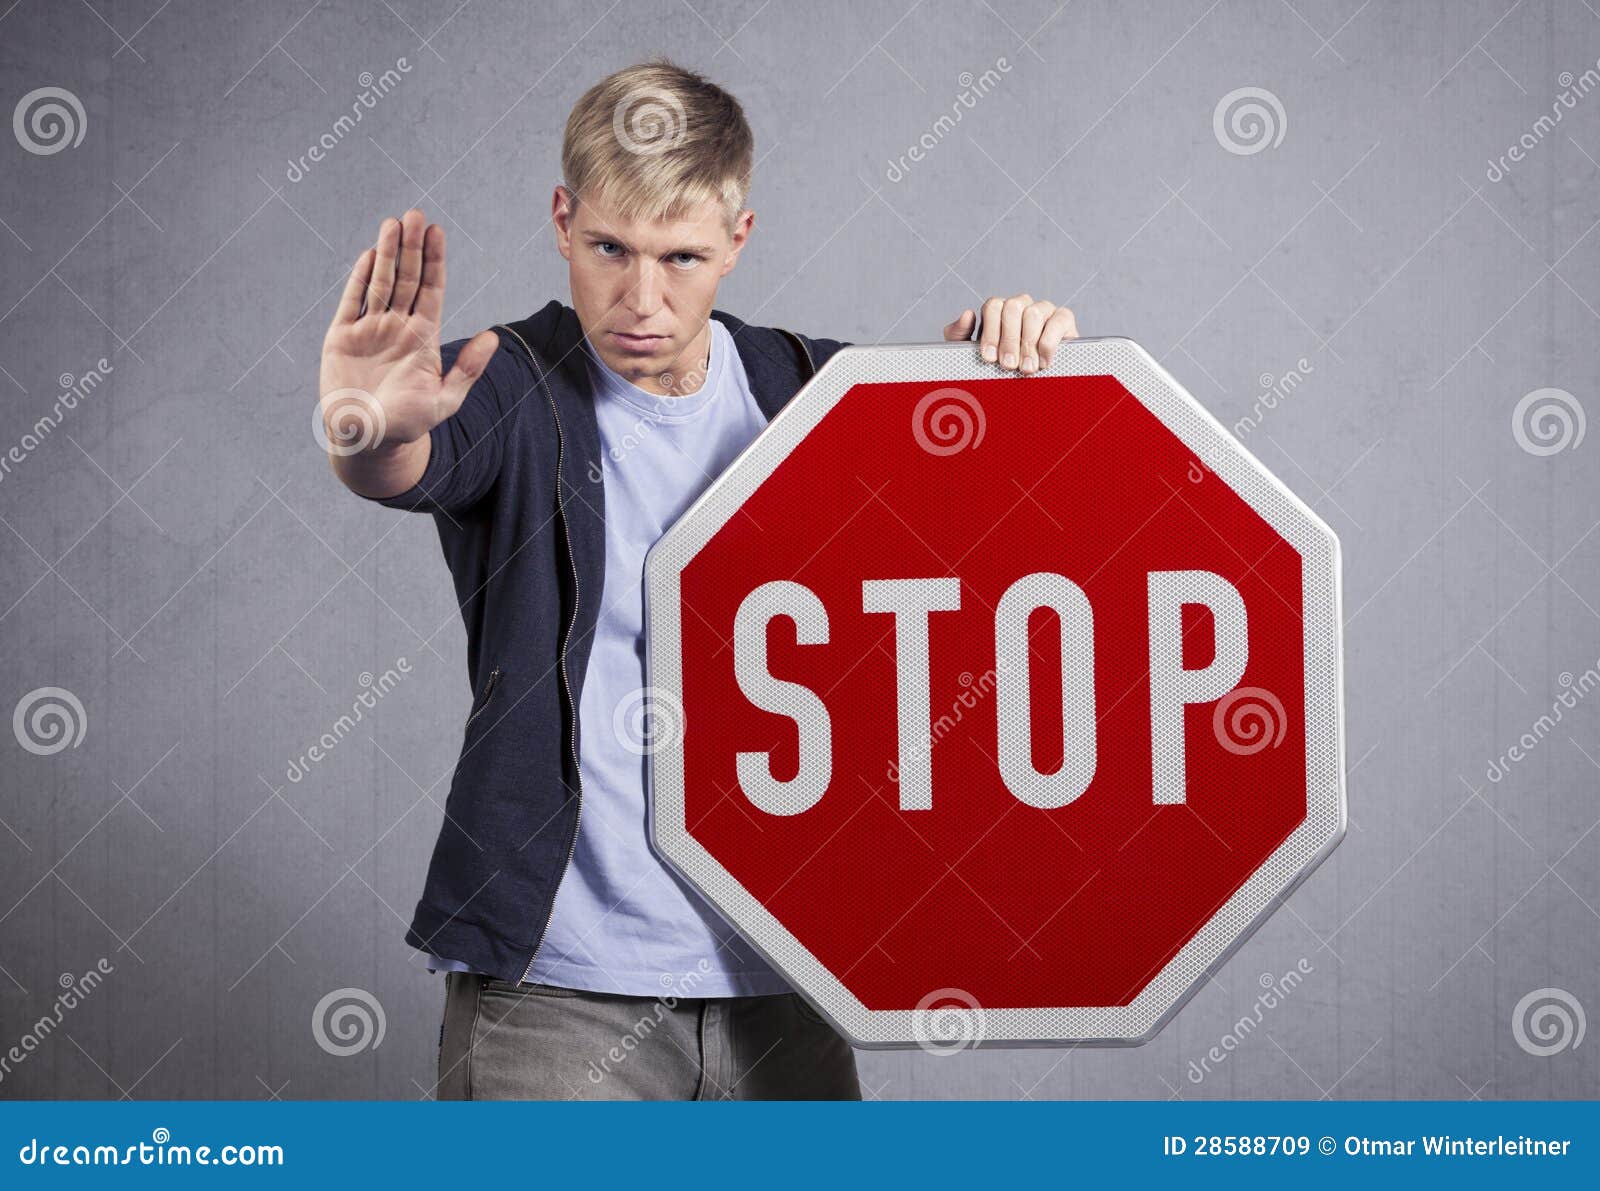 man showing stop sign.